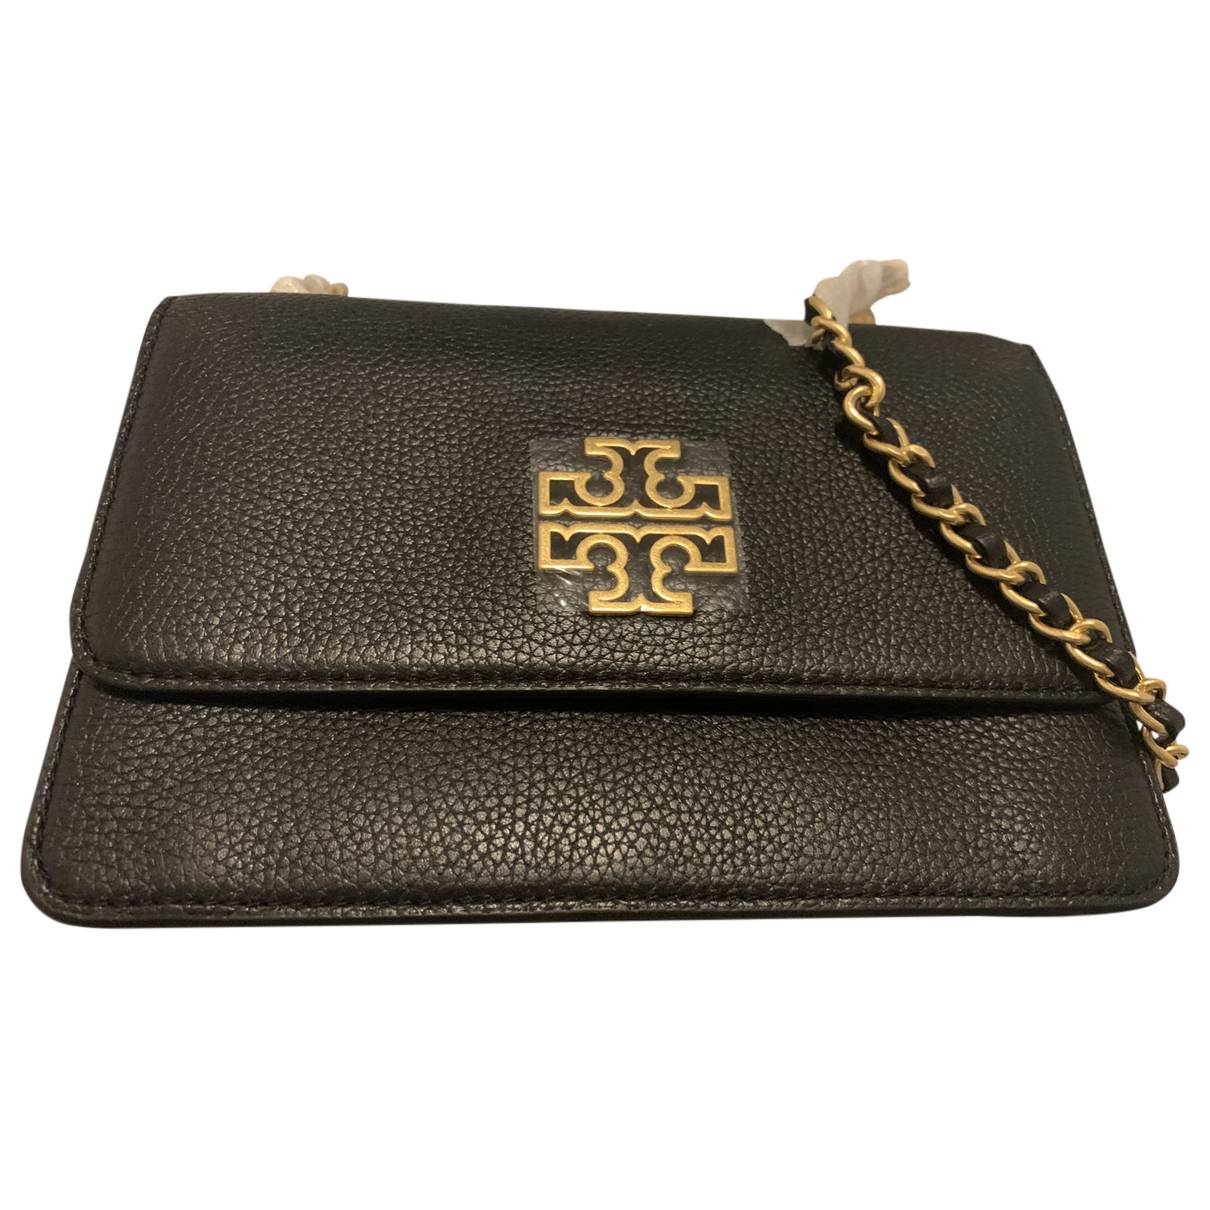 Leather crossbody bag Tory Burch Black in Leather - 26833464